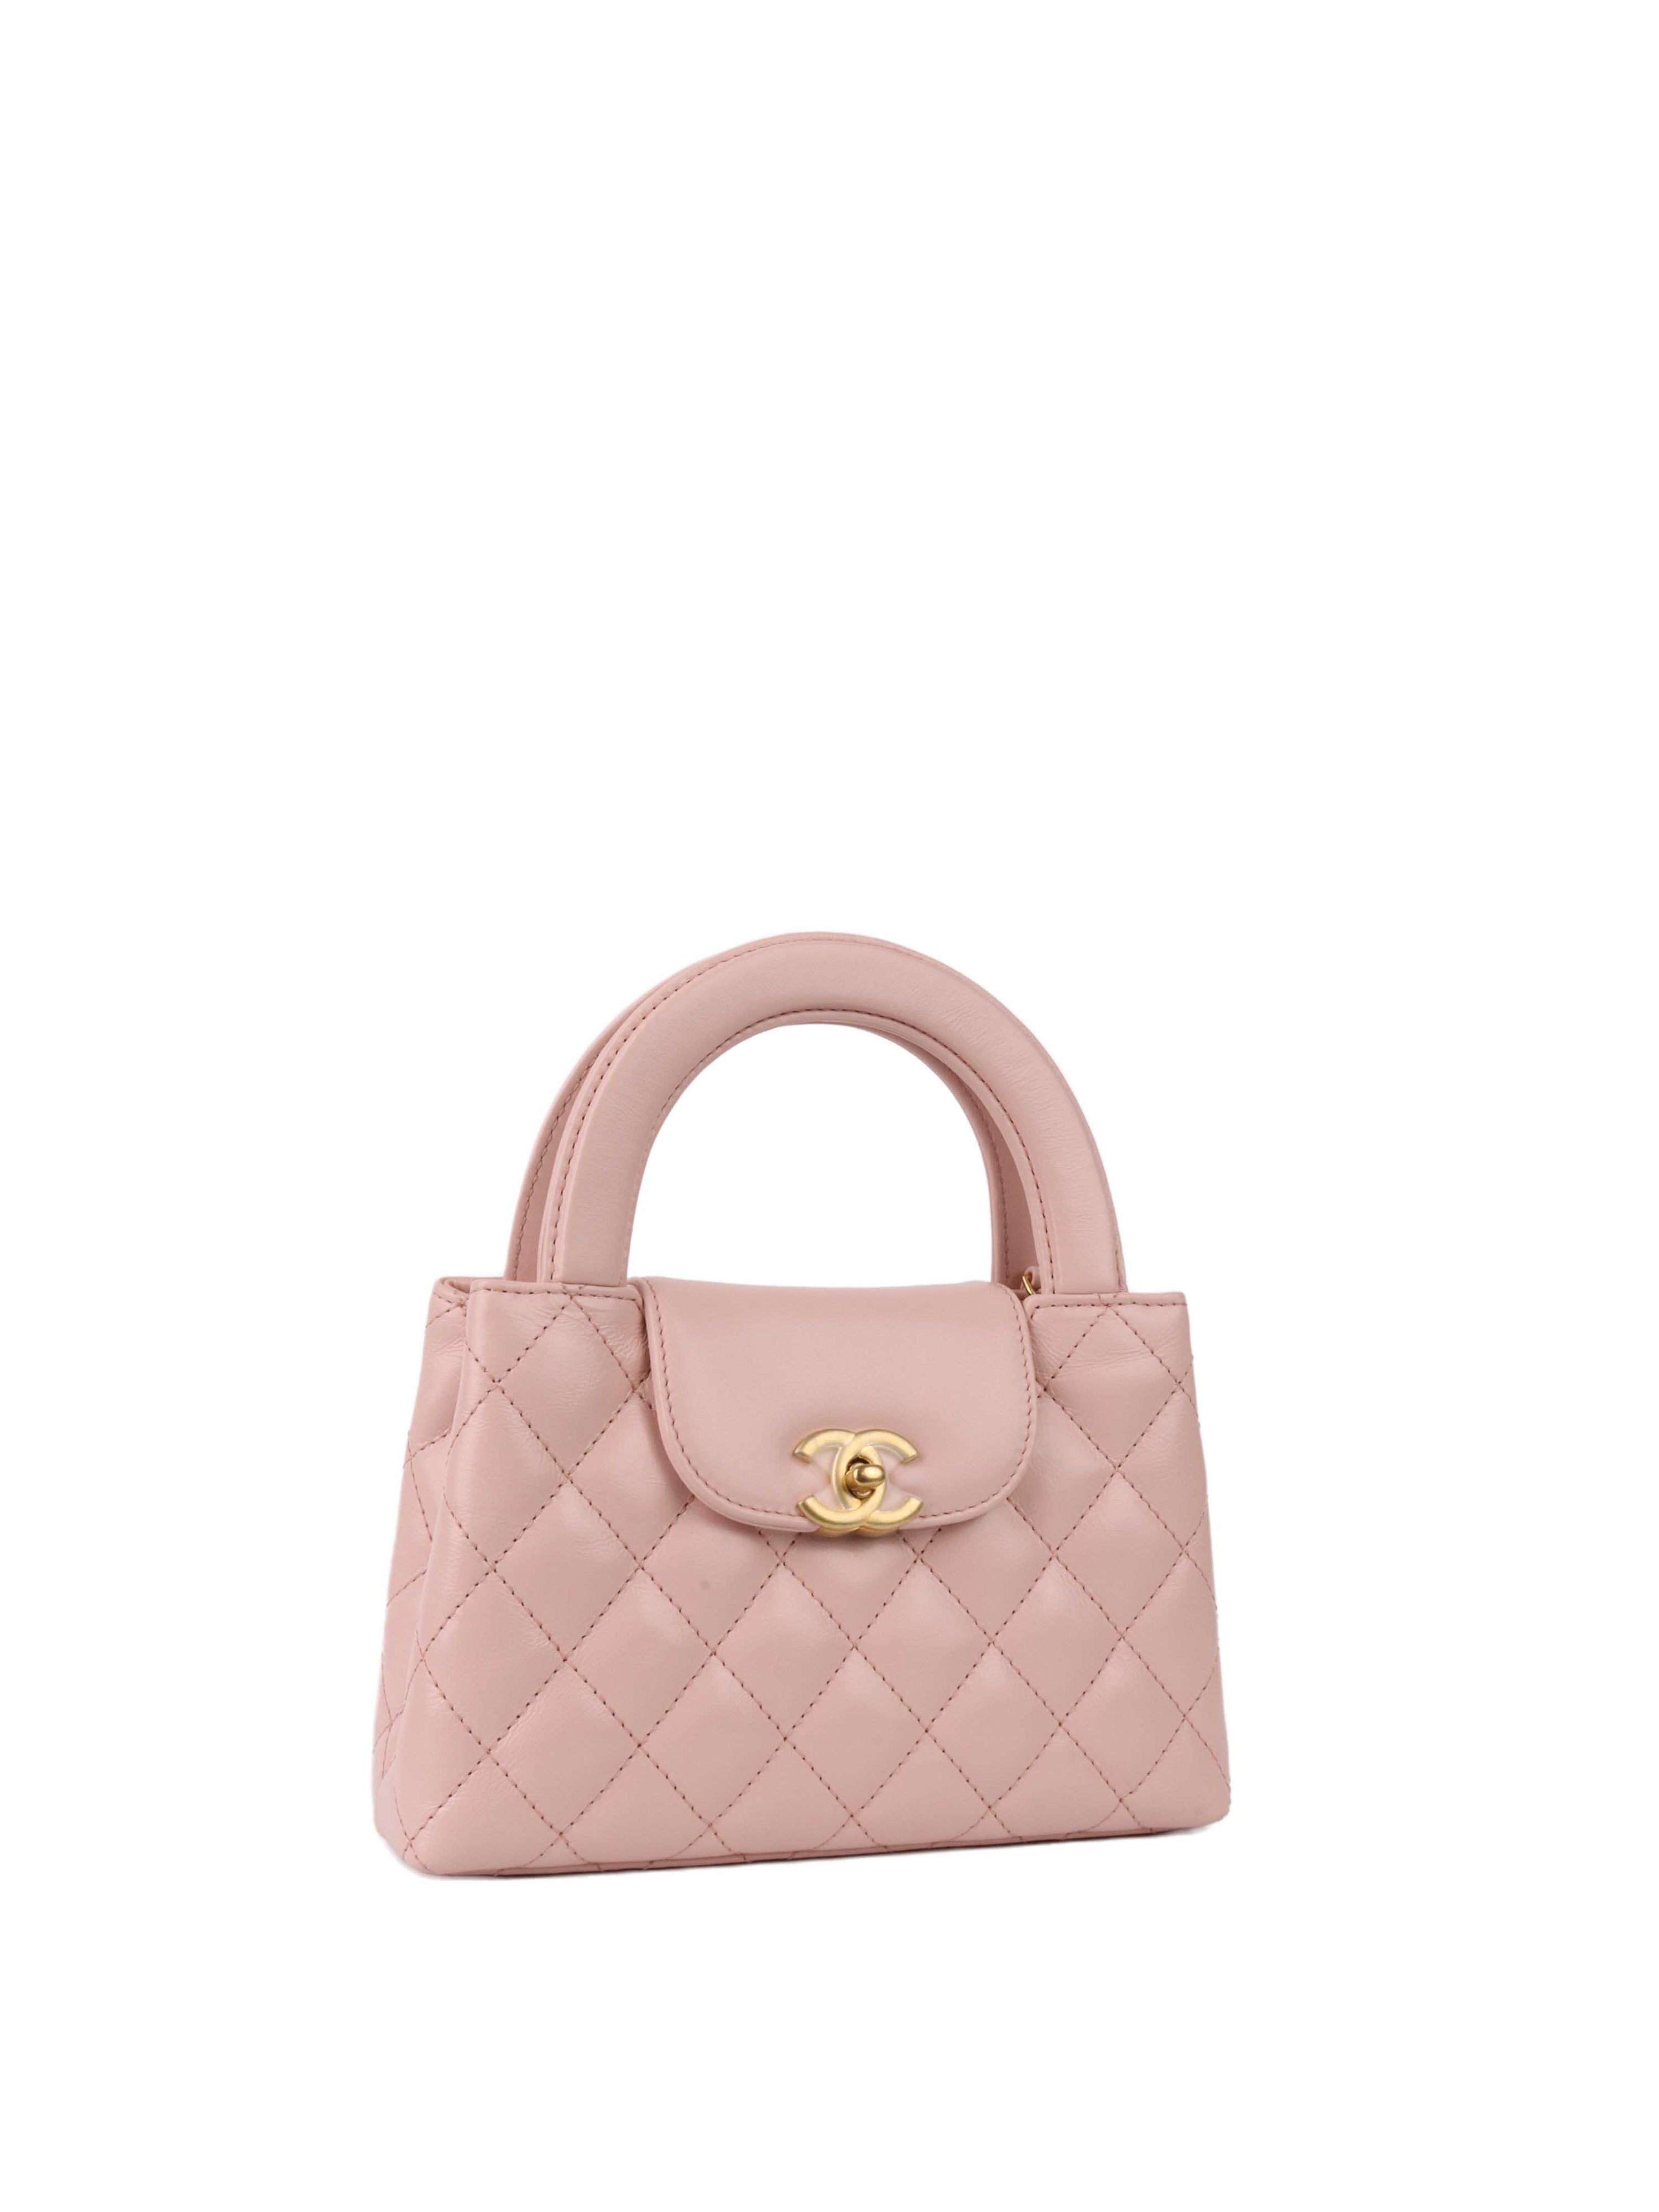 Chanel Pink Small Kelly Bag.